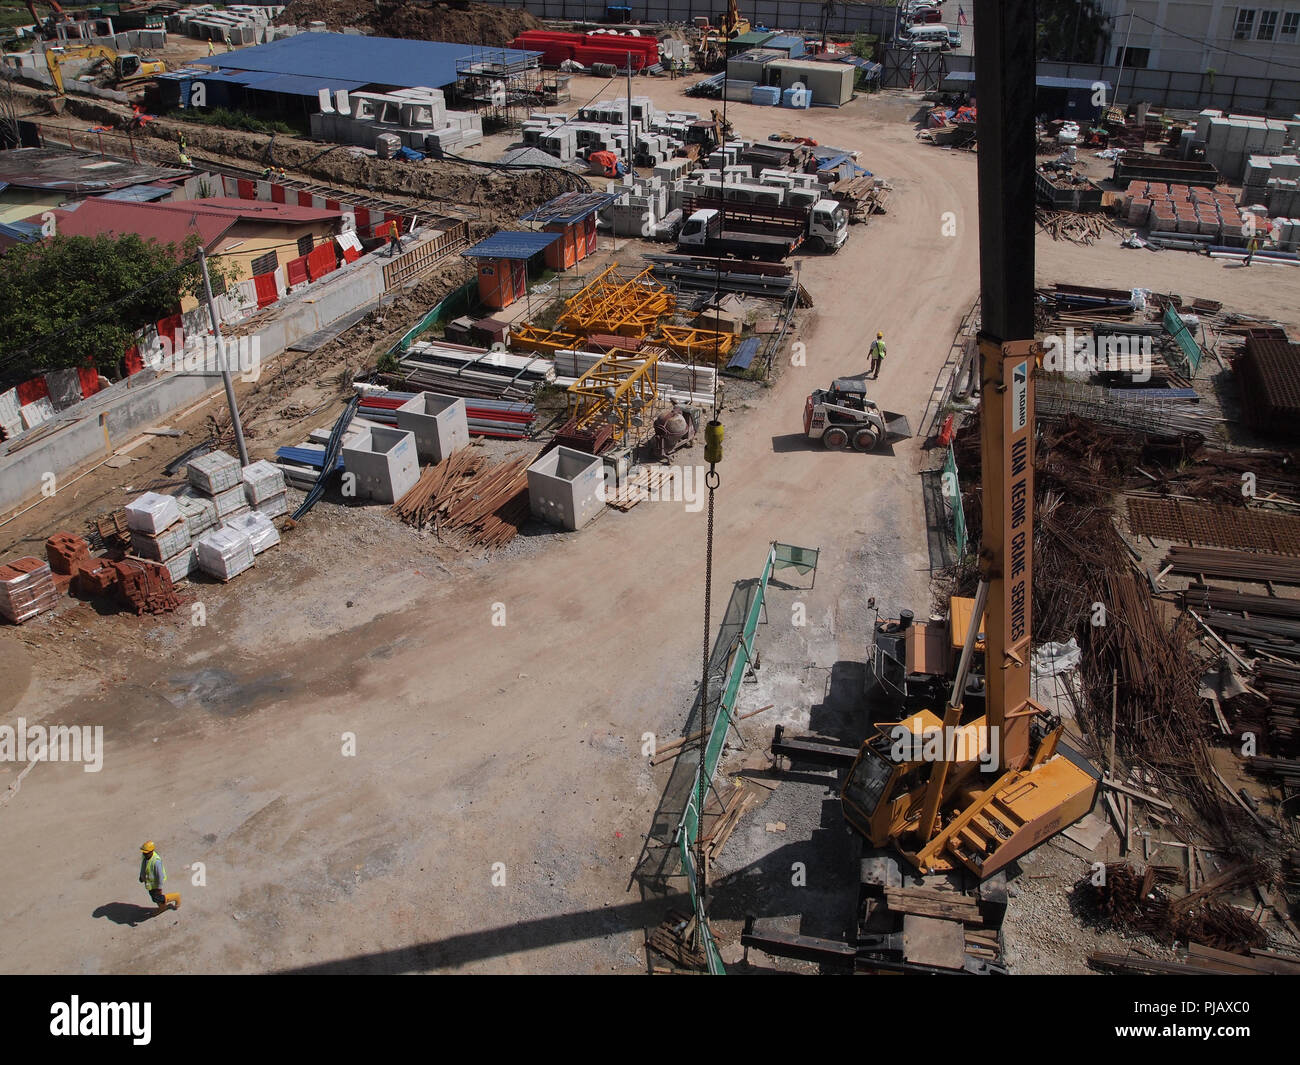 Construction site on progress at site. The construction of the building structure is still in its early stages. Earthwork work is also being done. Stock Photo